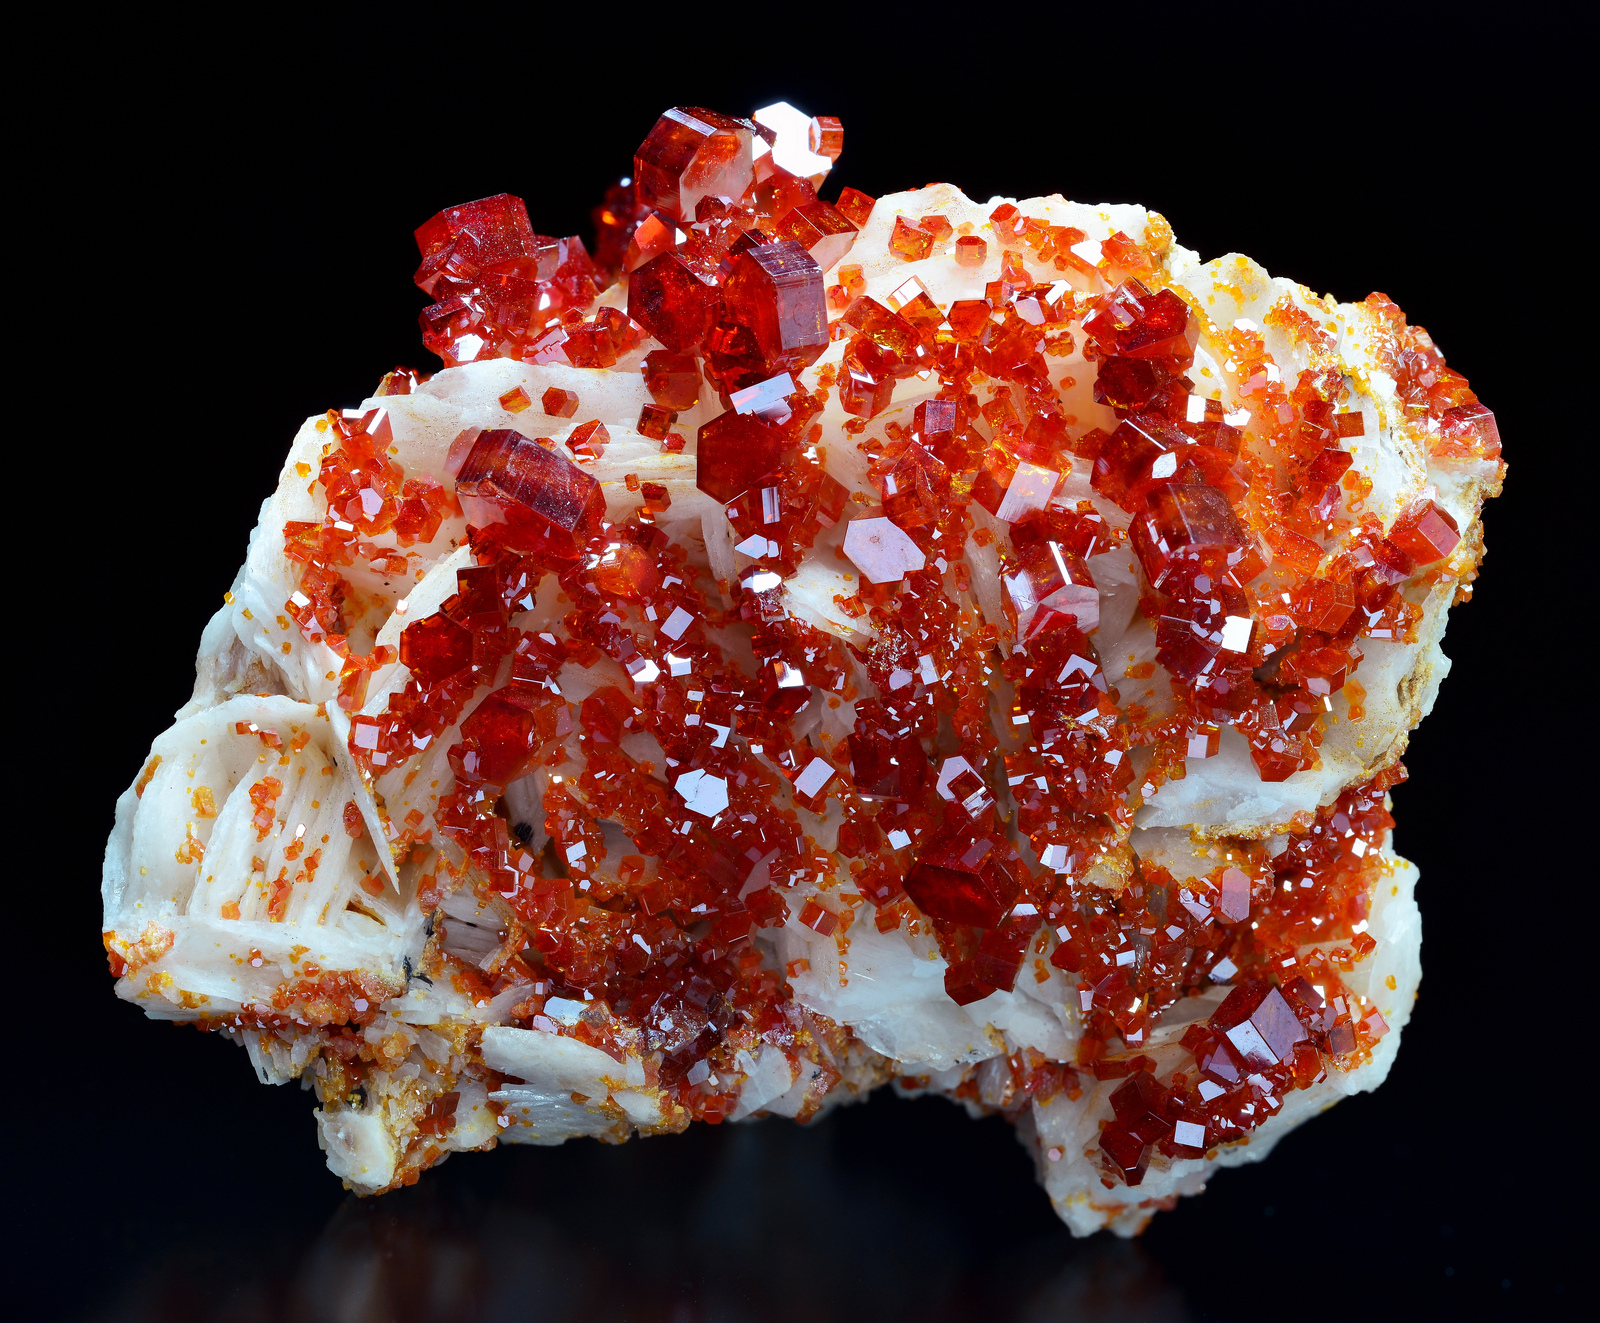 10 Beautiful Minerals You Won’t Believe Are Found On Earth